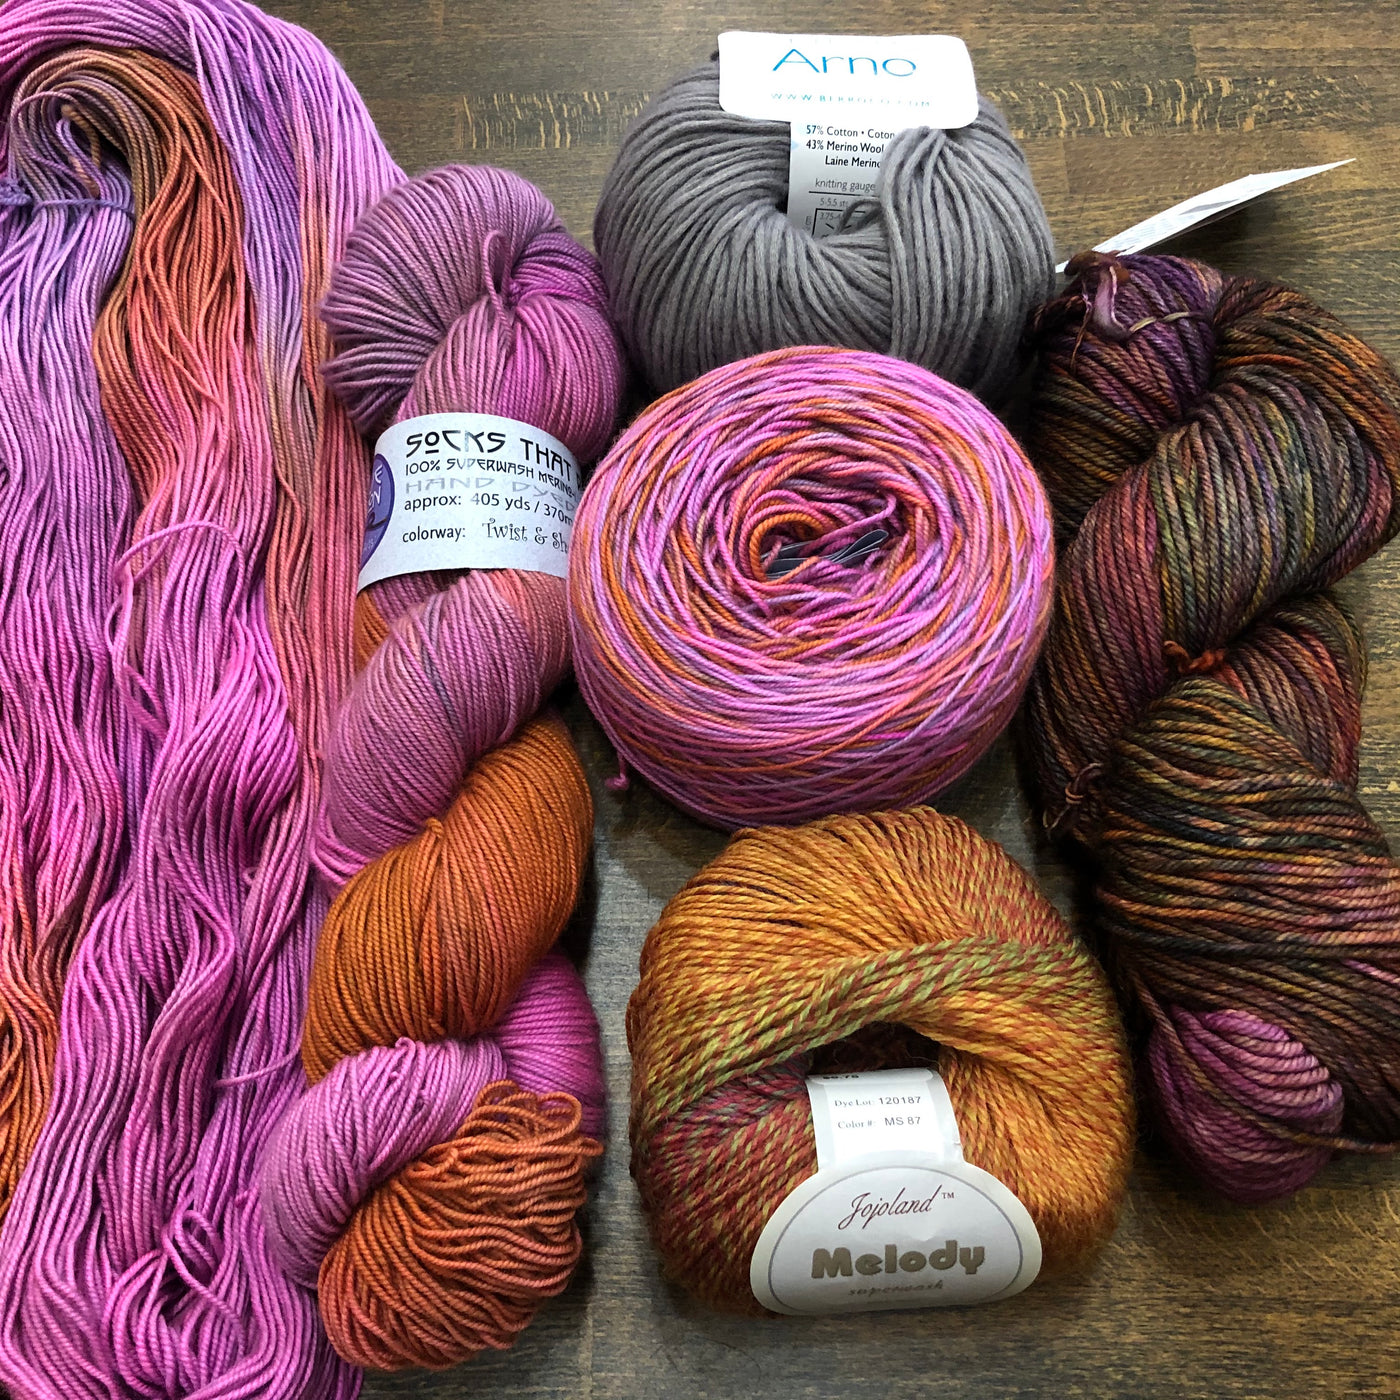 Wound and Unwound Yarn